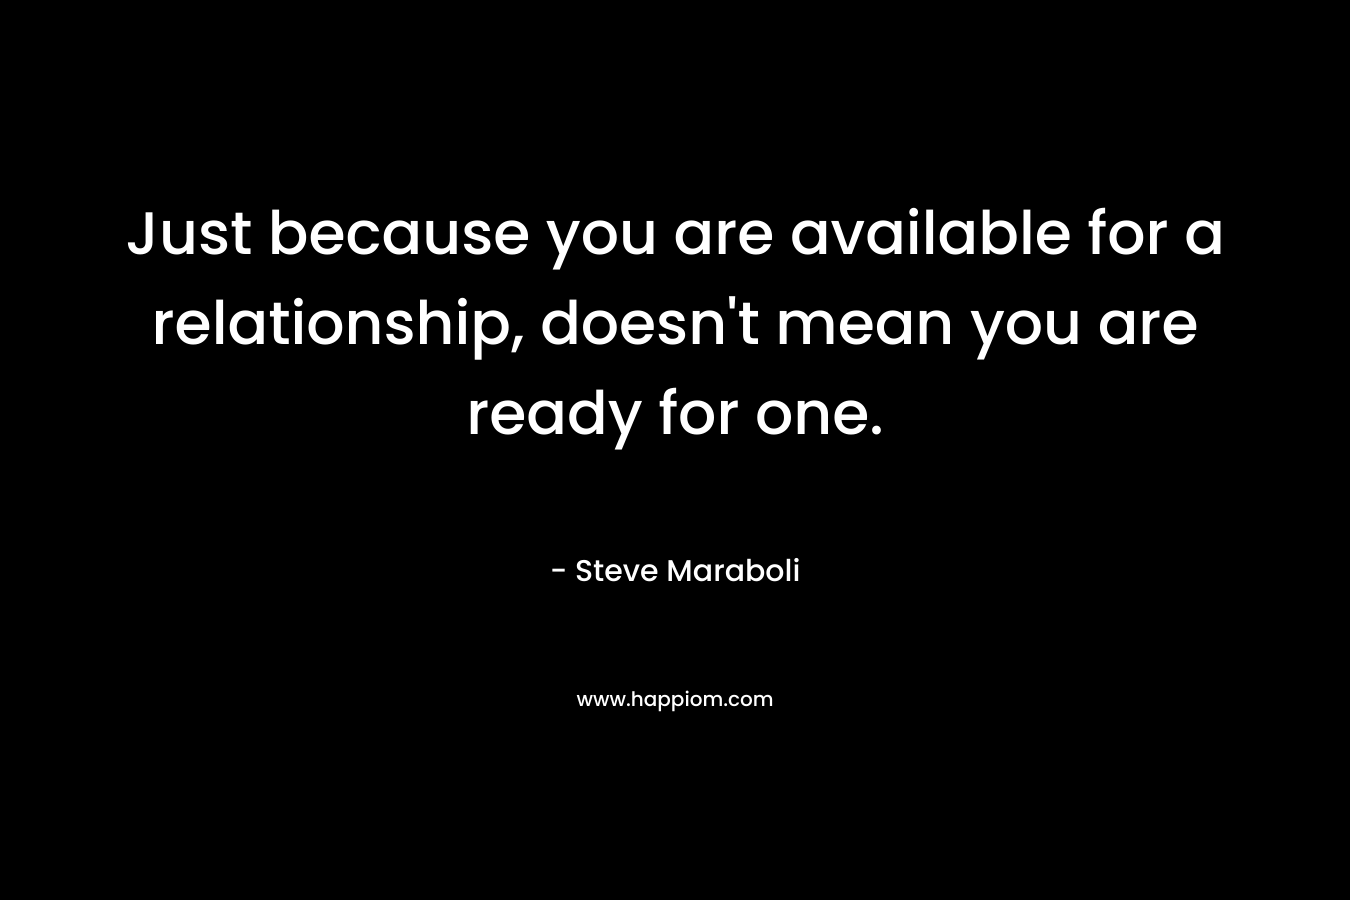 Just because you are available for a relationship, doesn't mean you are ready for one.